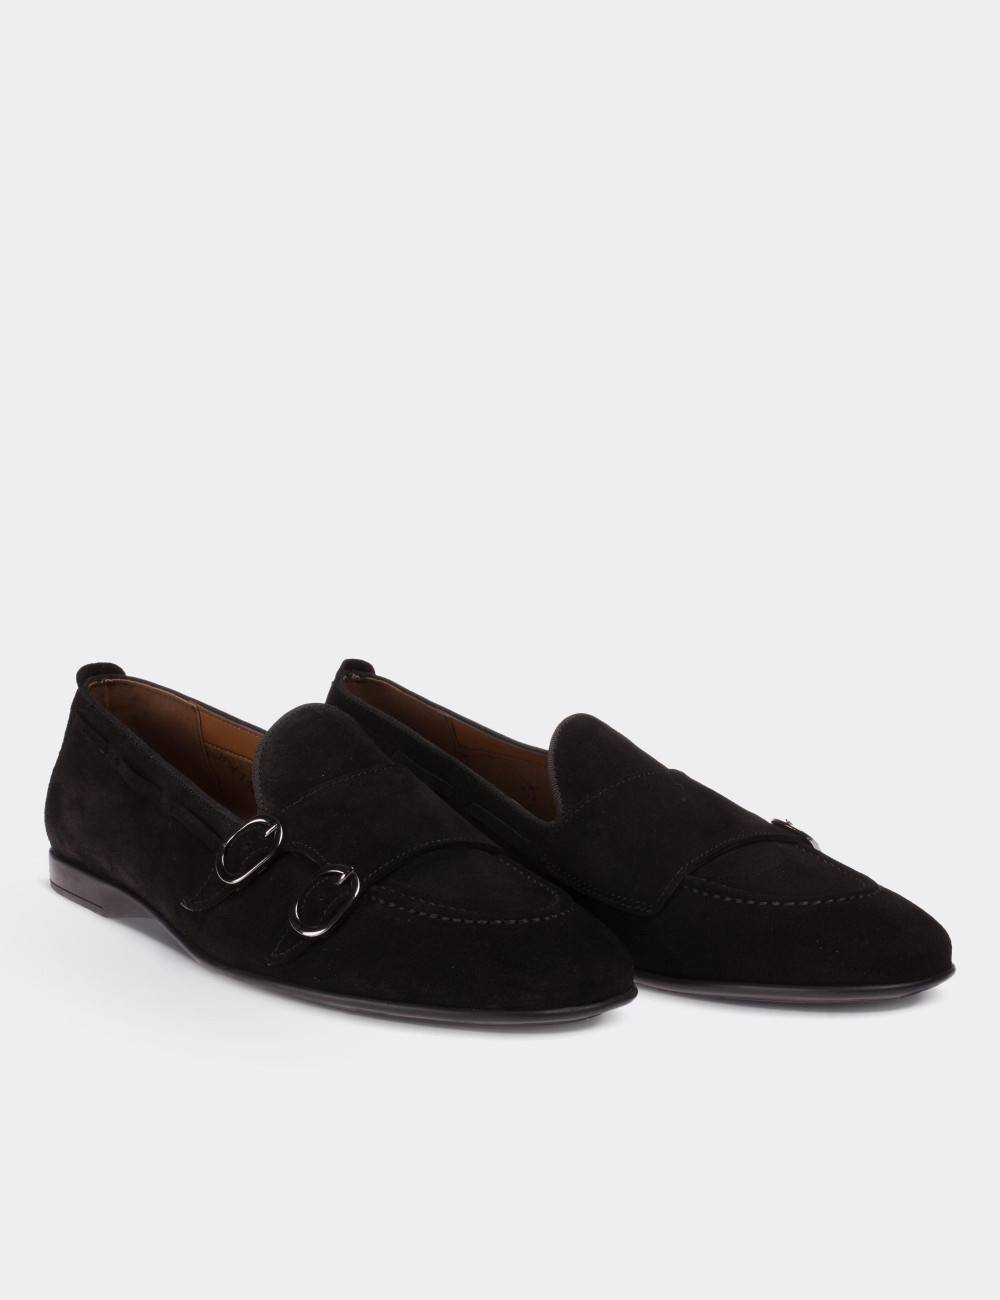 Black Suede Leather Loafers - 01645MSYHC02